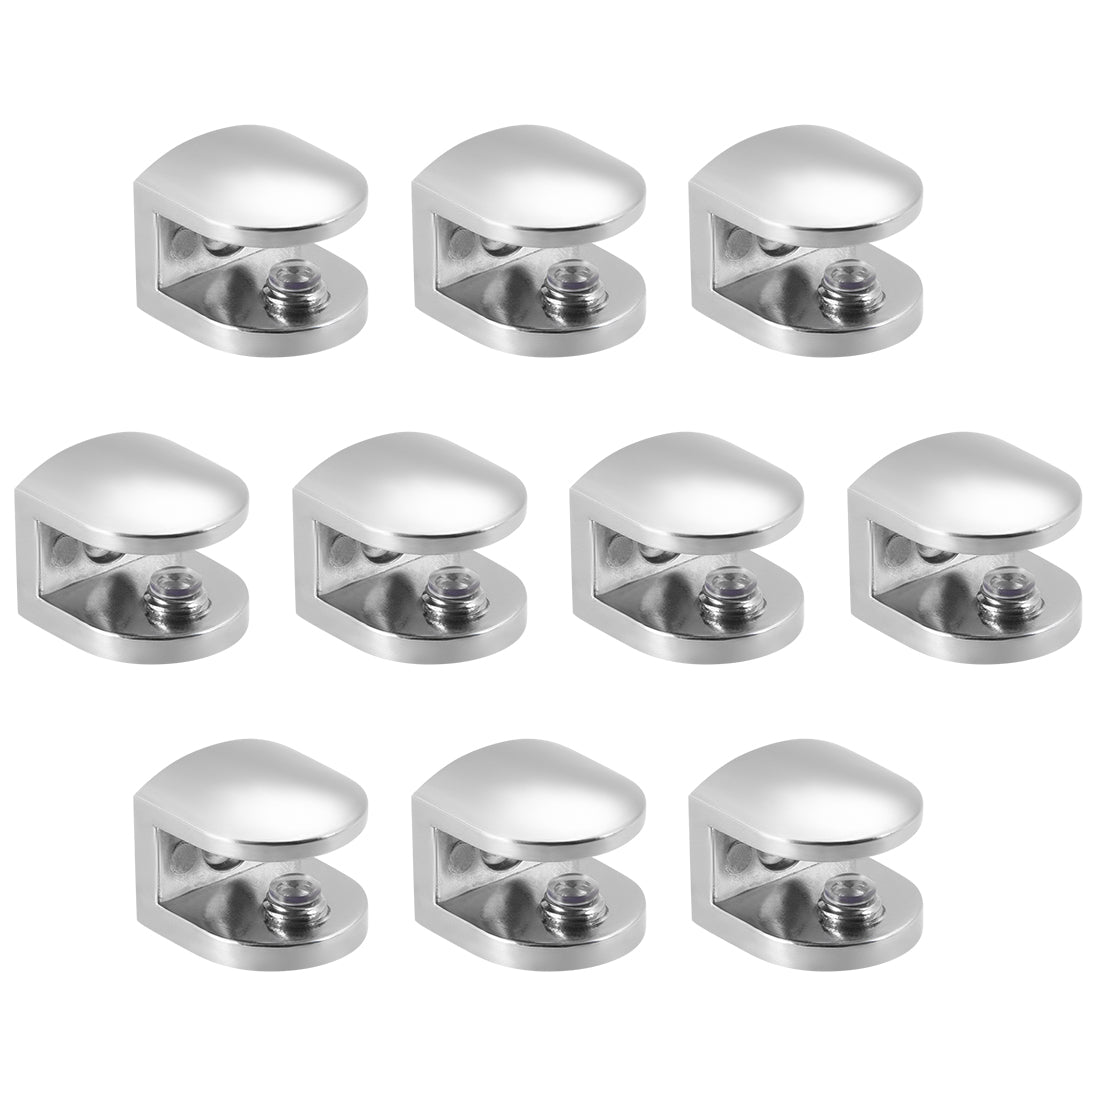 Uxcell Uxcell Glass Shelf Support, Zinc Alloy Clip Holder for 8-10mm Thickness 4pcs